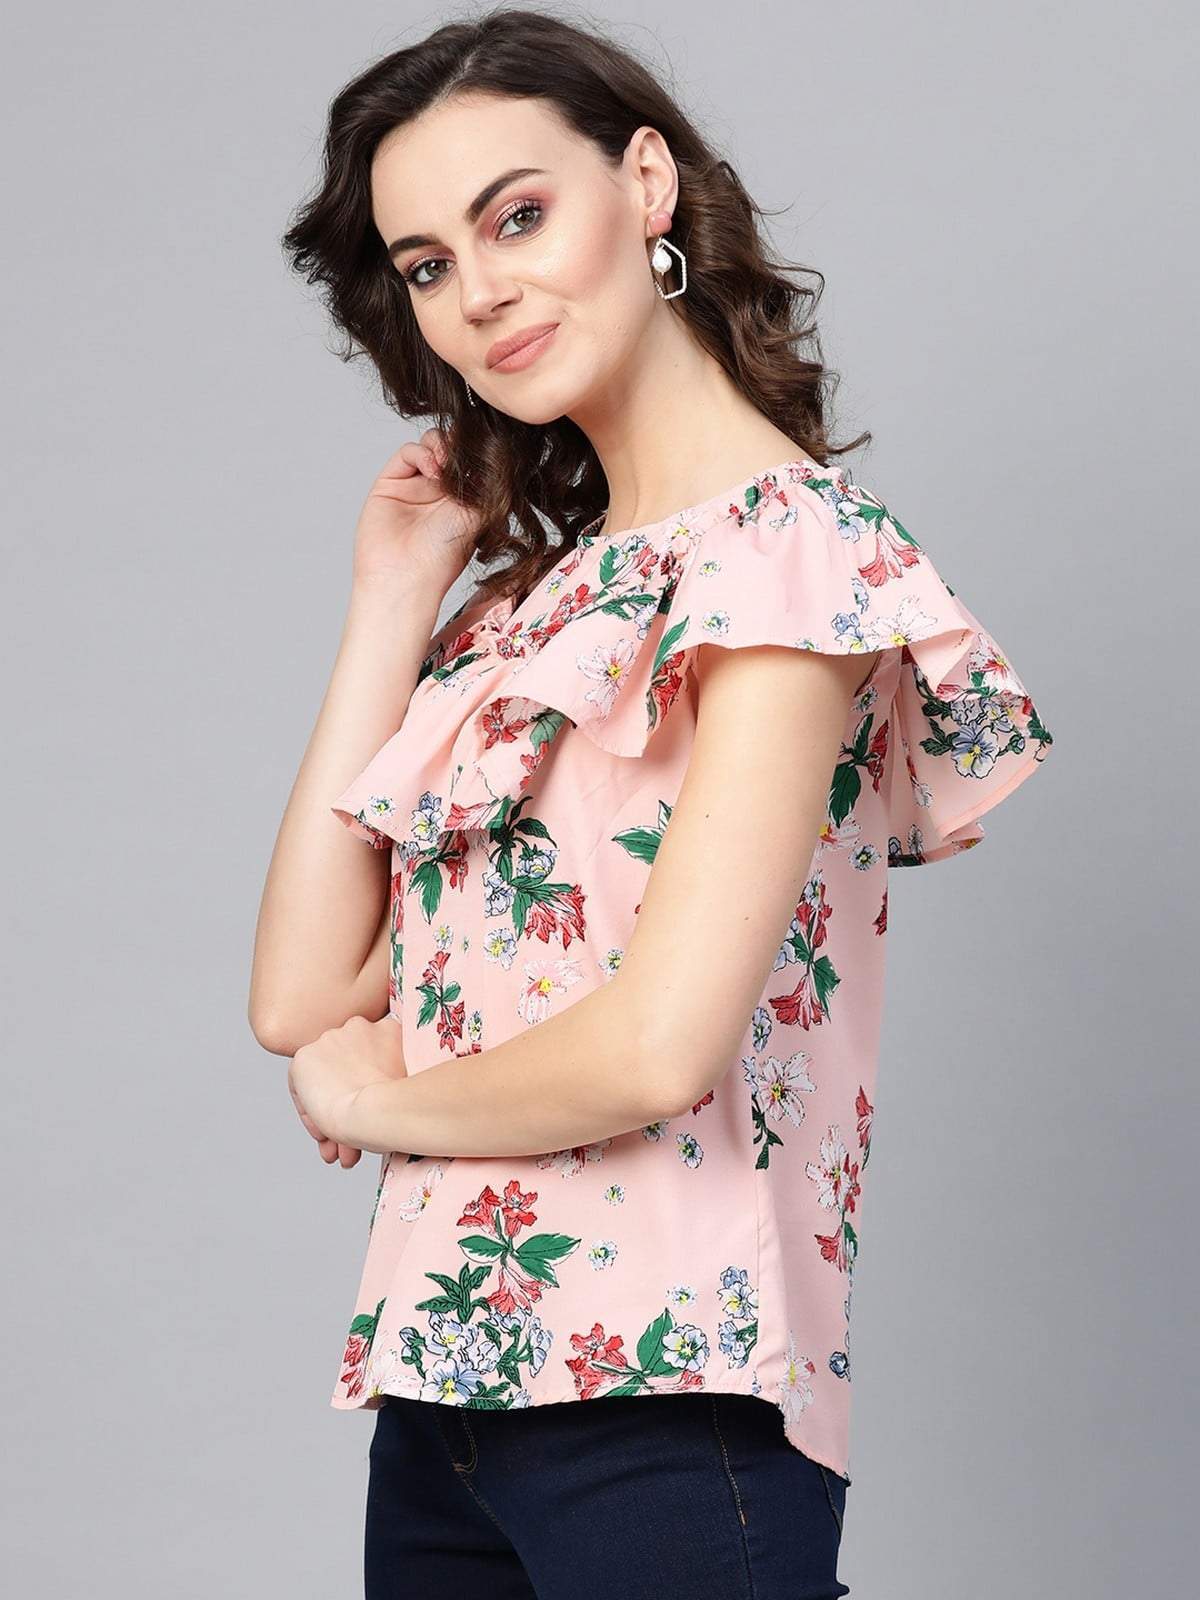 Women's Floral Top With Gathered Neck Flare - Pannkh